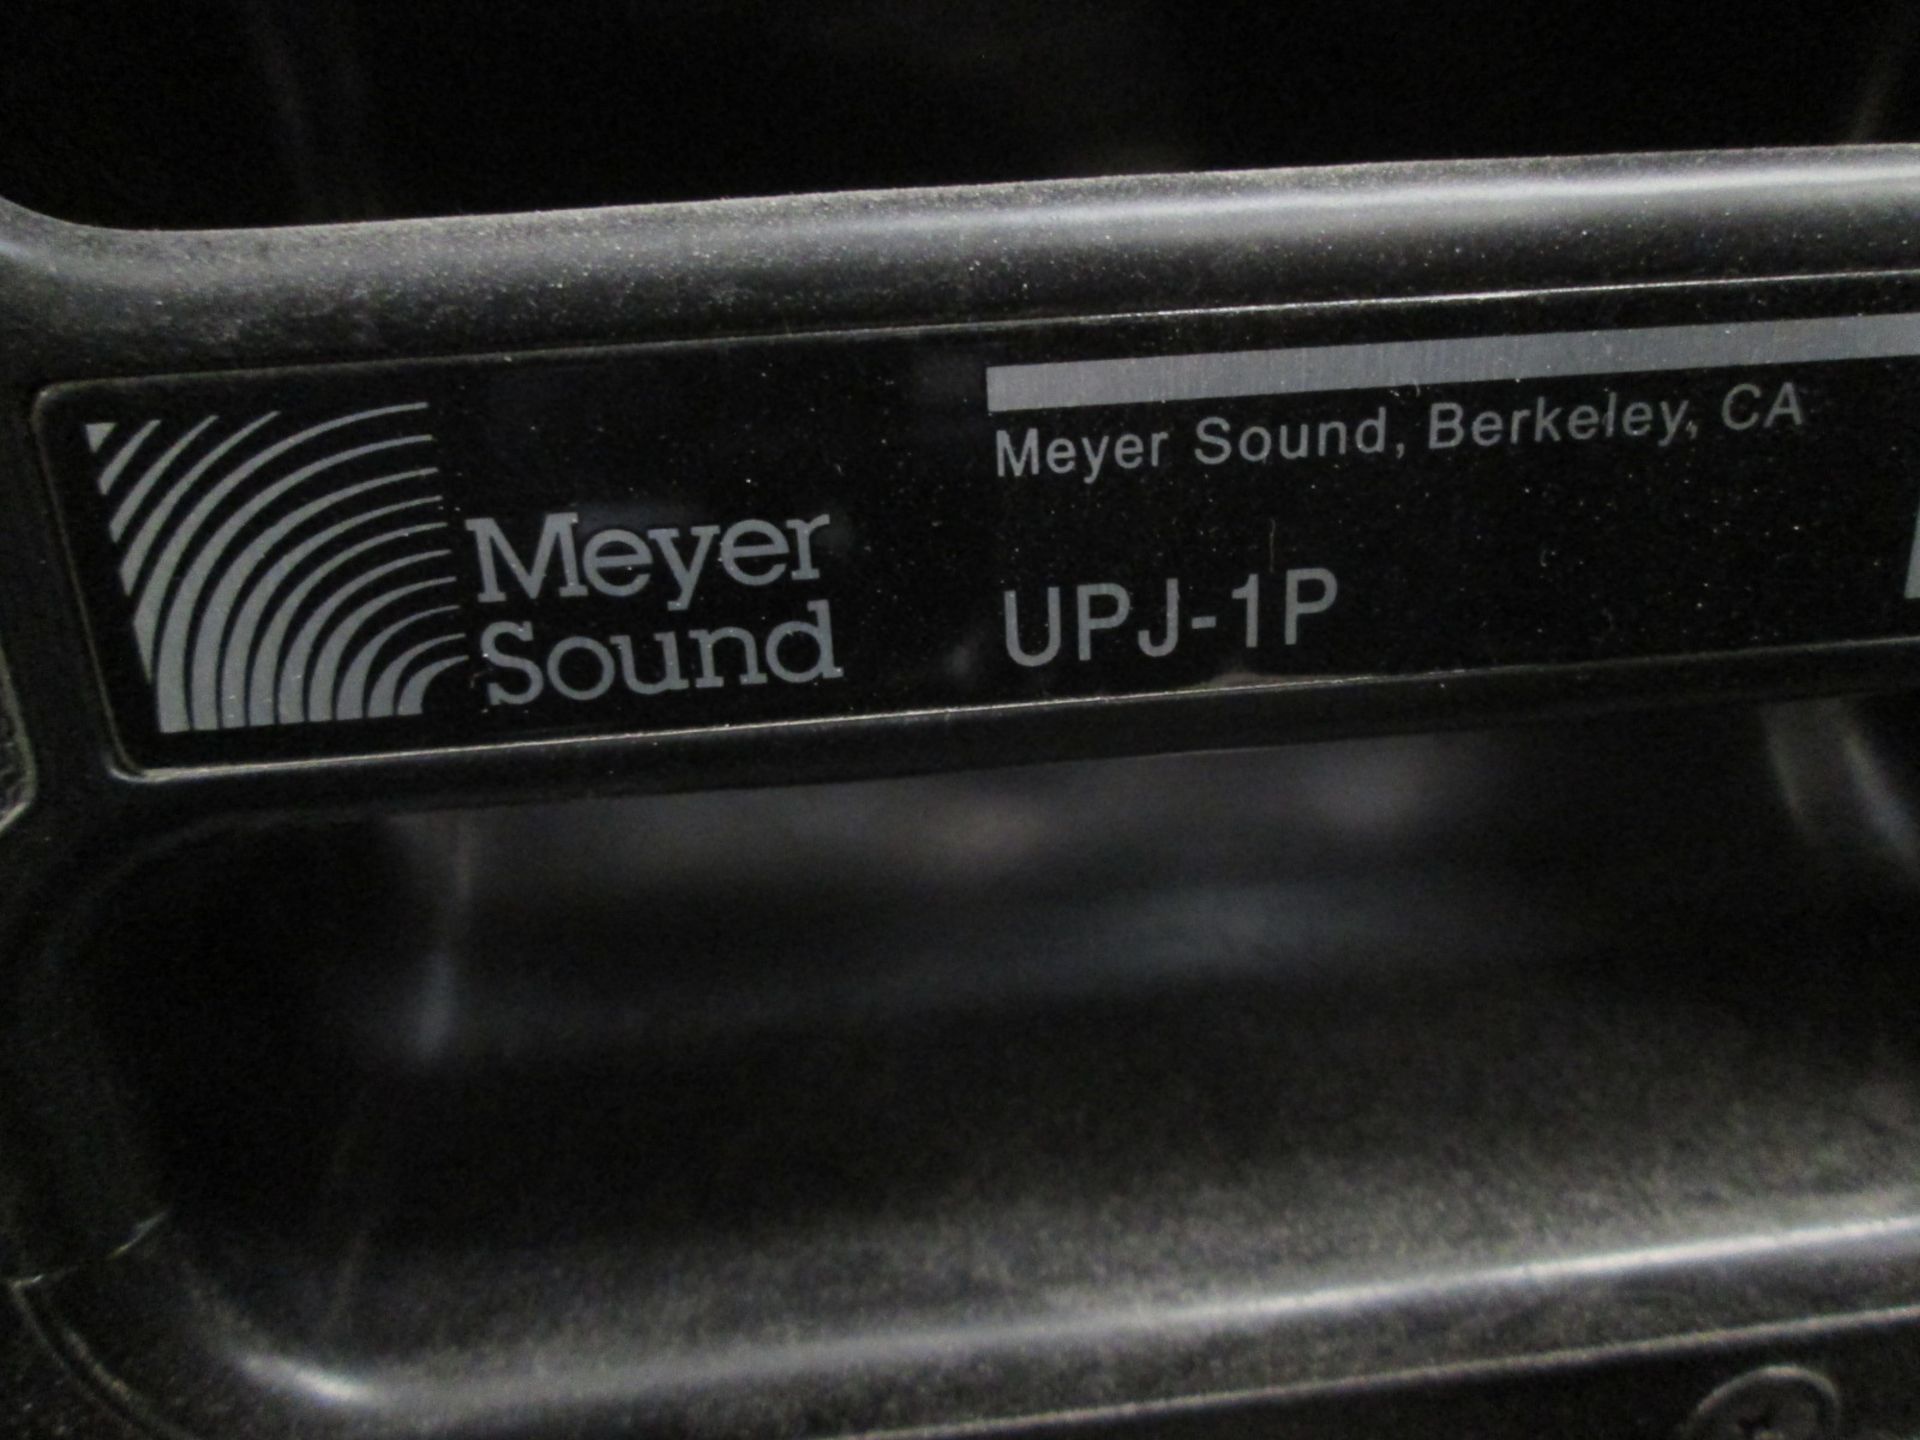 Meyer Sound UPJ-1P Powered Loudspeakers (Qty 2) S/N 08276597, 08276598, With hanging bracket - Image 4 of 7